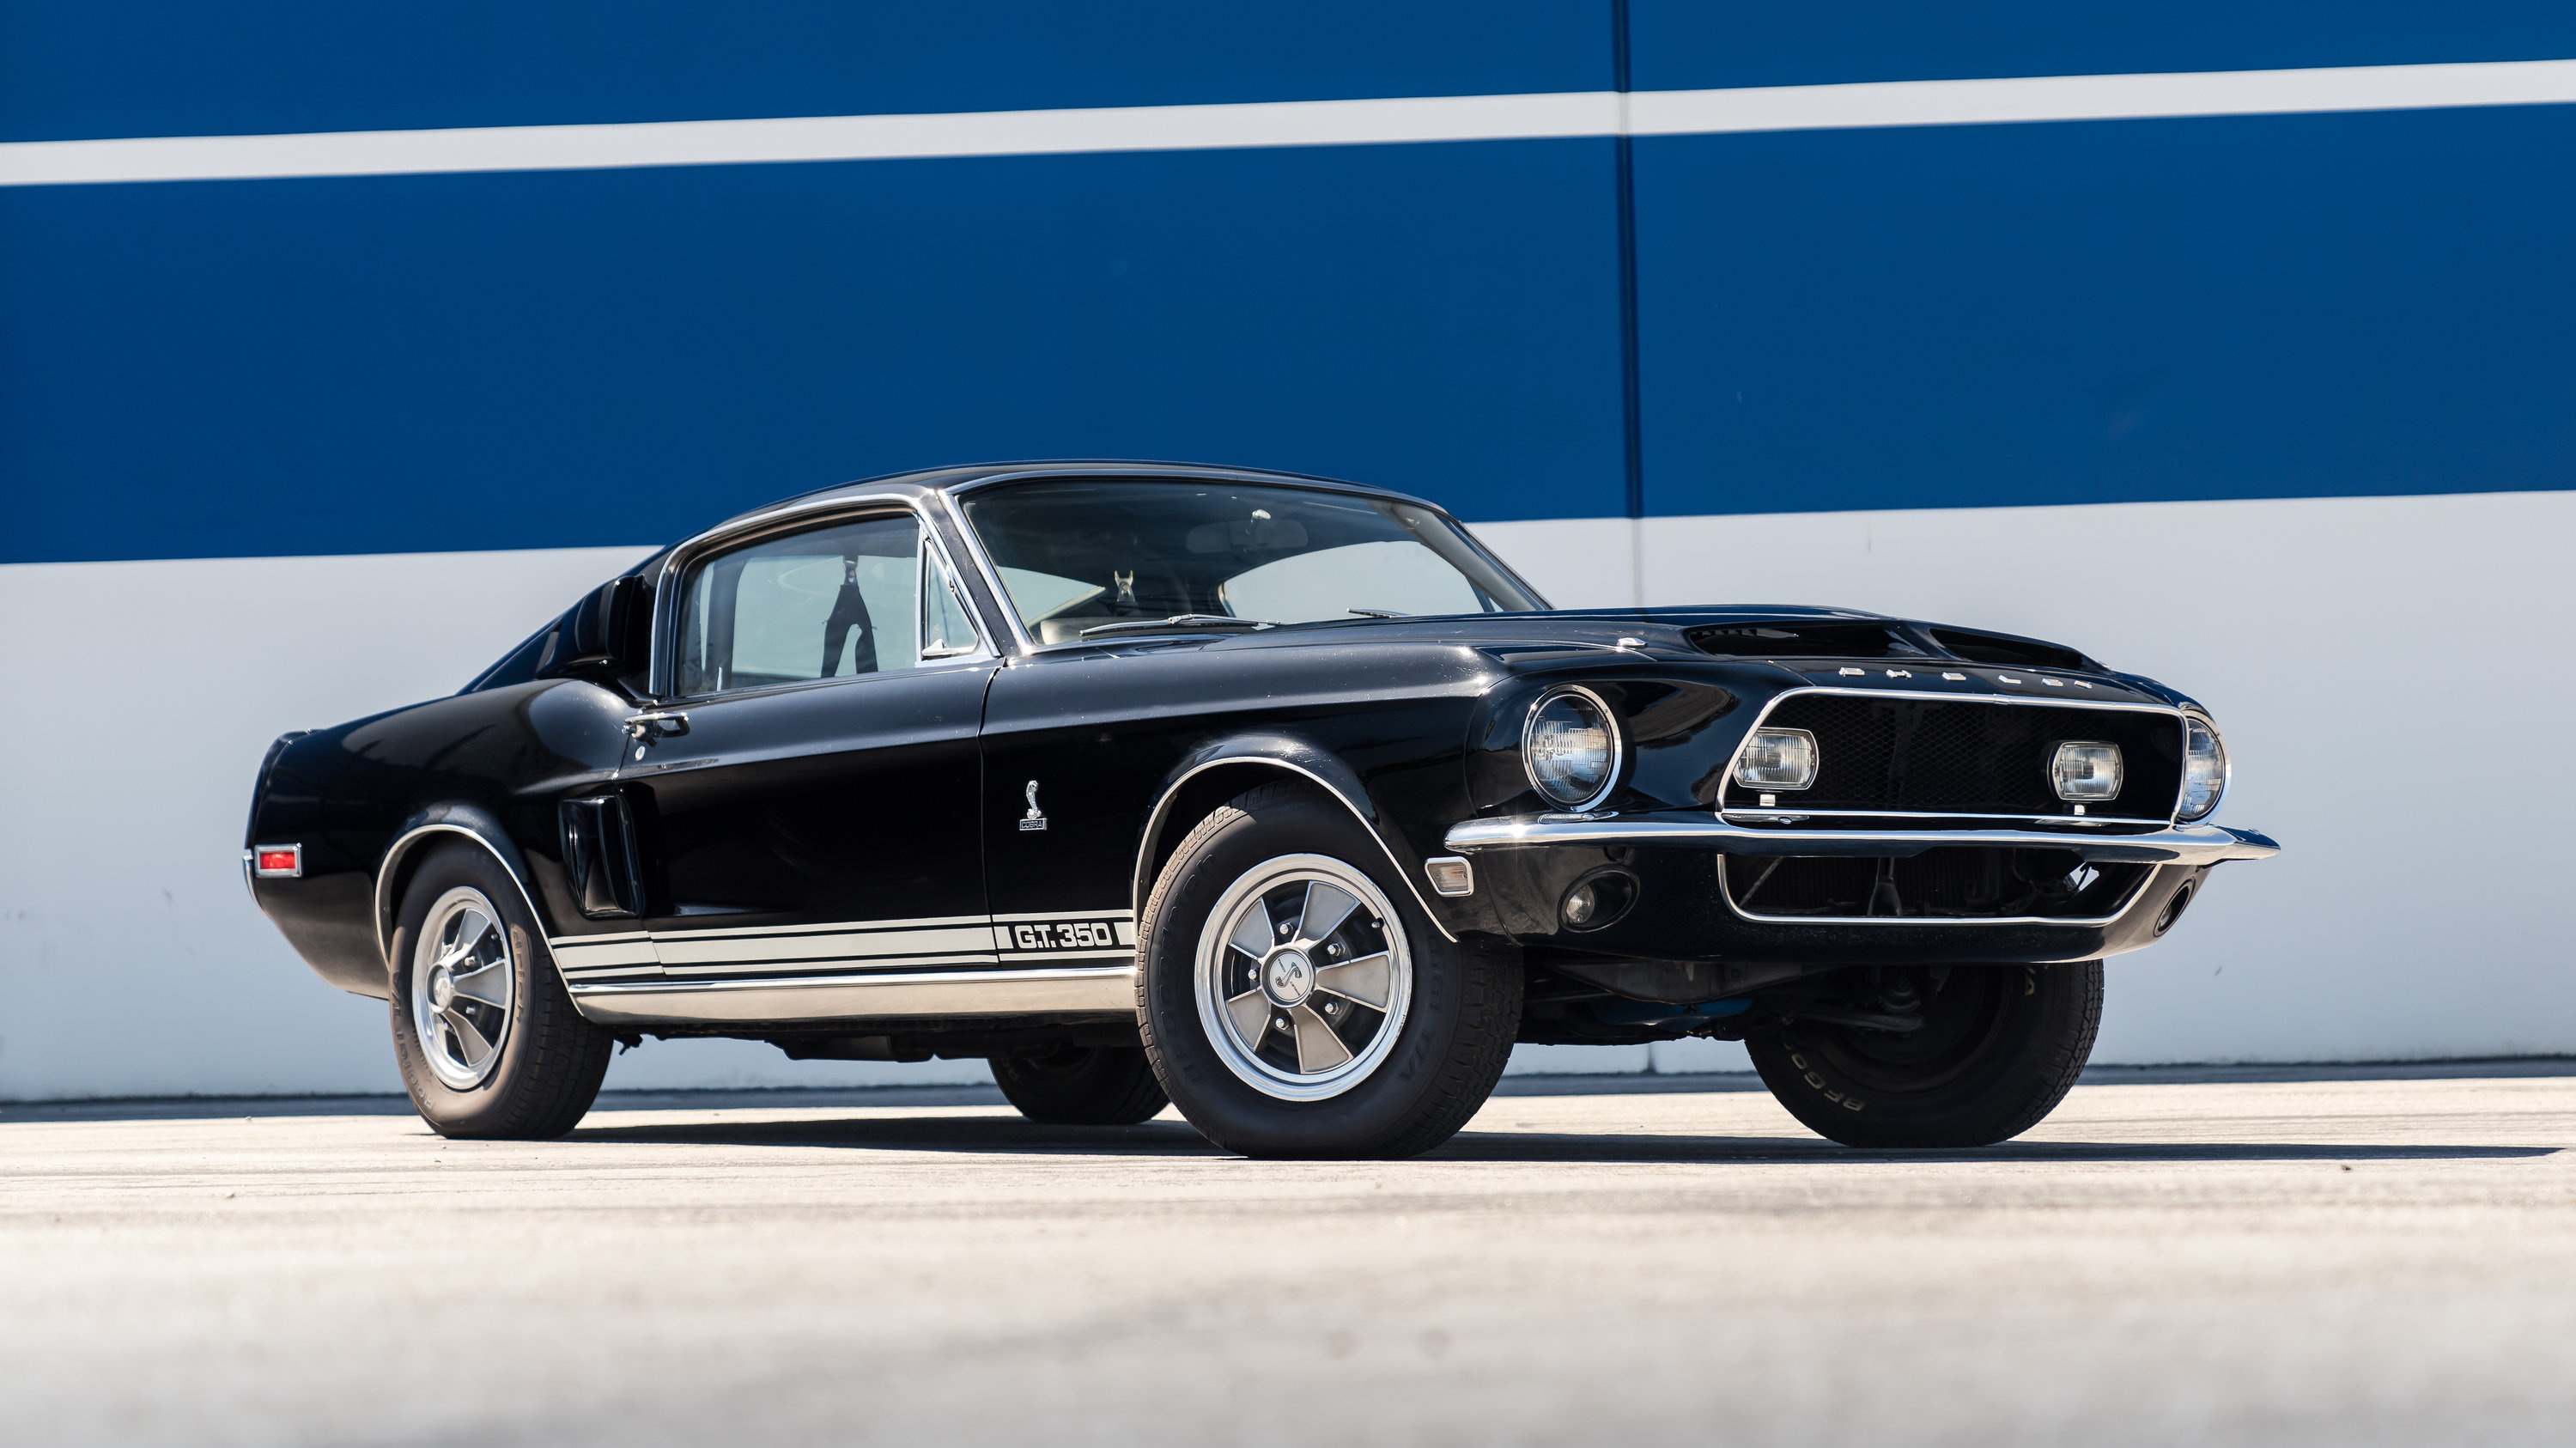 Symbol of freedom, Mustang preservation, Ford's commitment, American classic, Evocative design, 3000x1690 HD Desktop